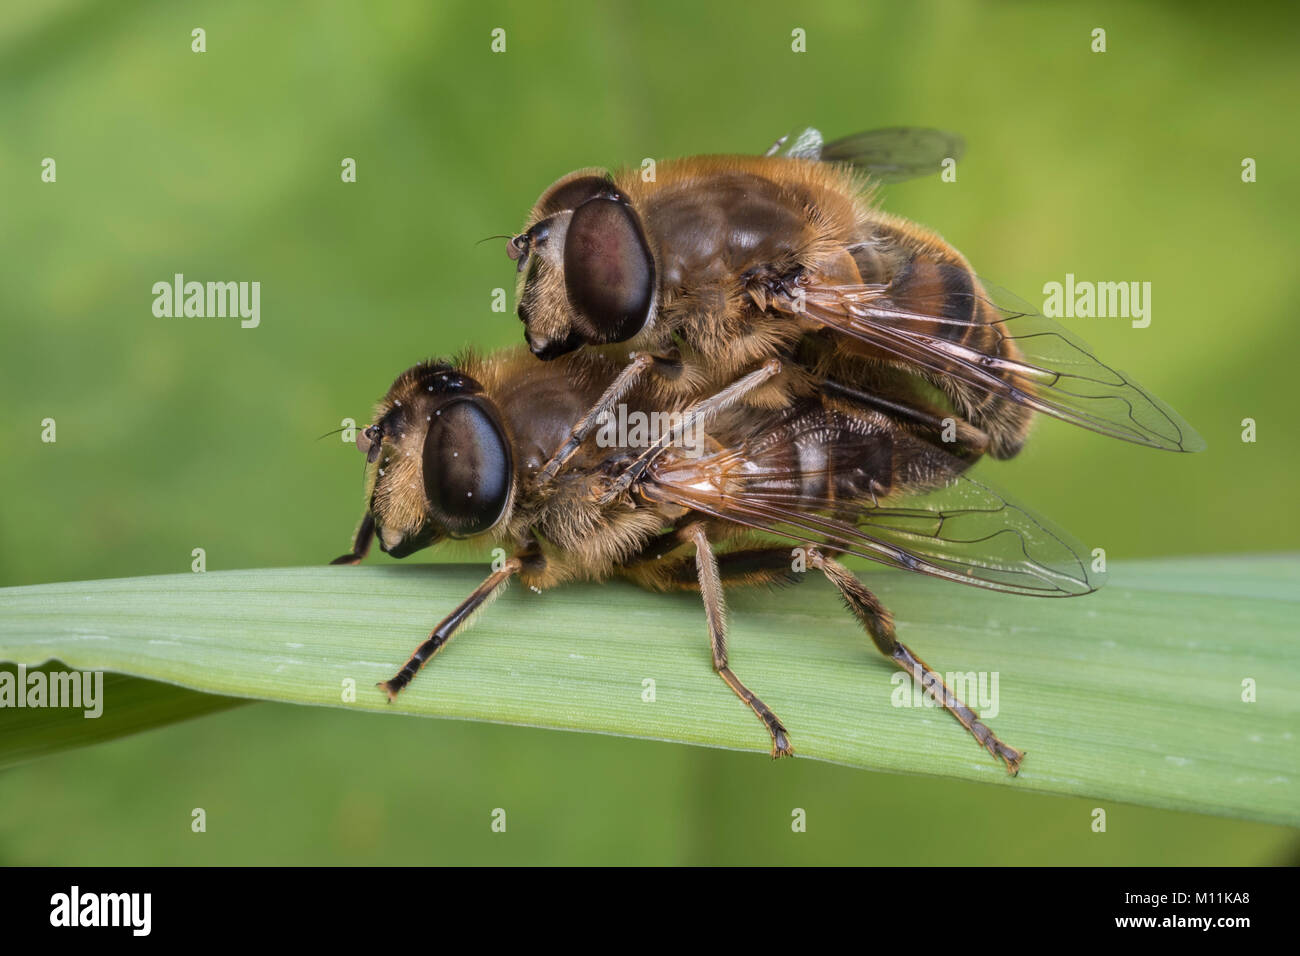 Mating Hoverflies (Eristalis sp.) on a stem of grass in wetland habitat. Cabragh Wetlands, Thurles, Tipperary. Stock Photo